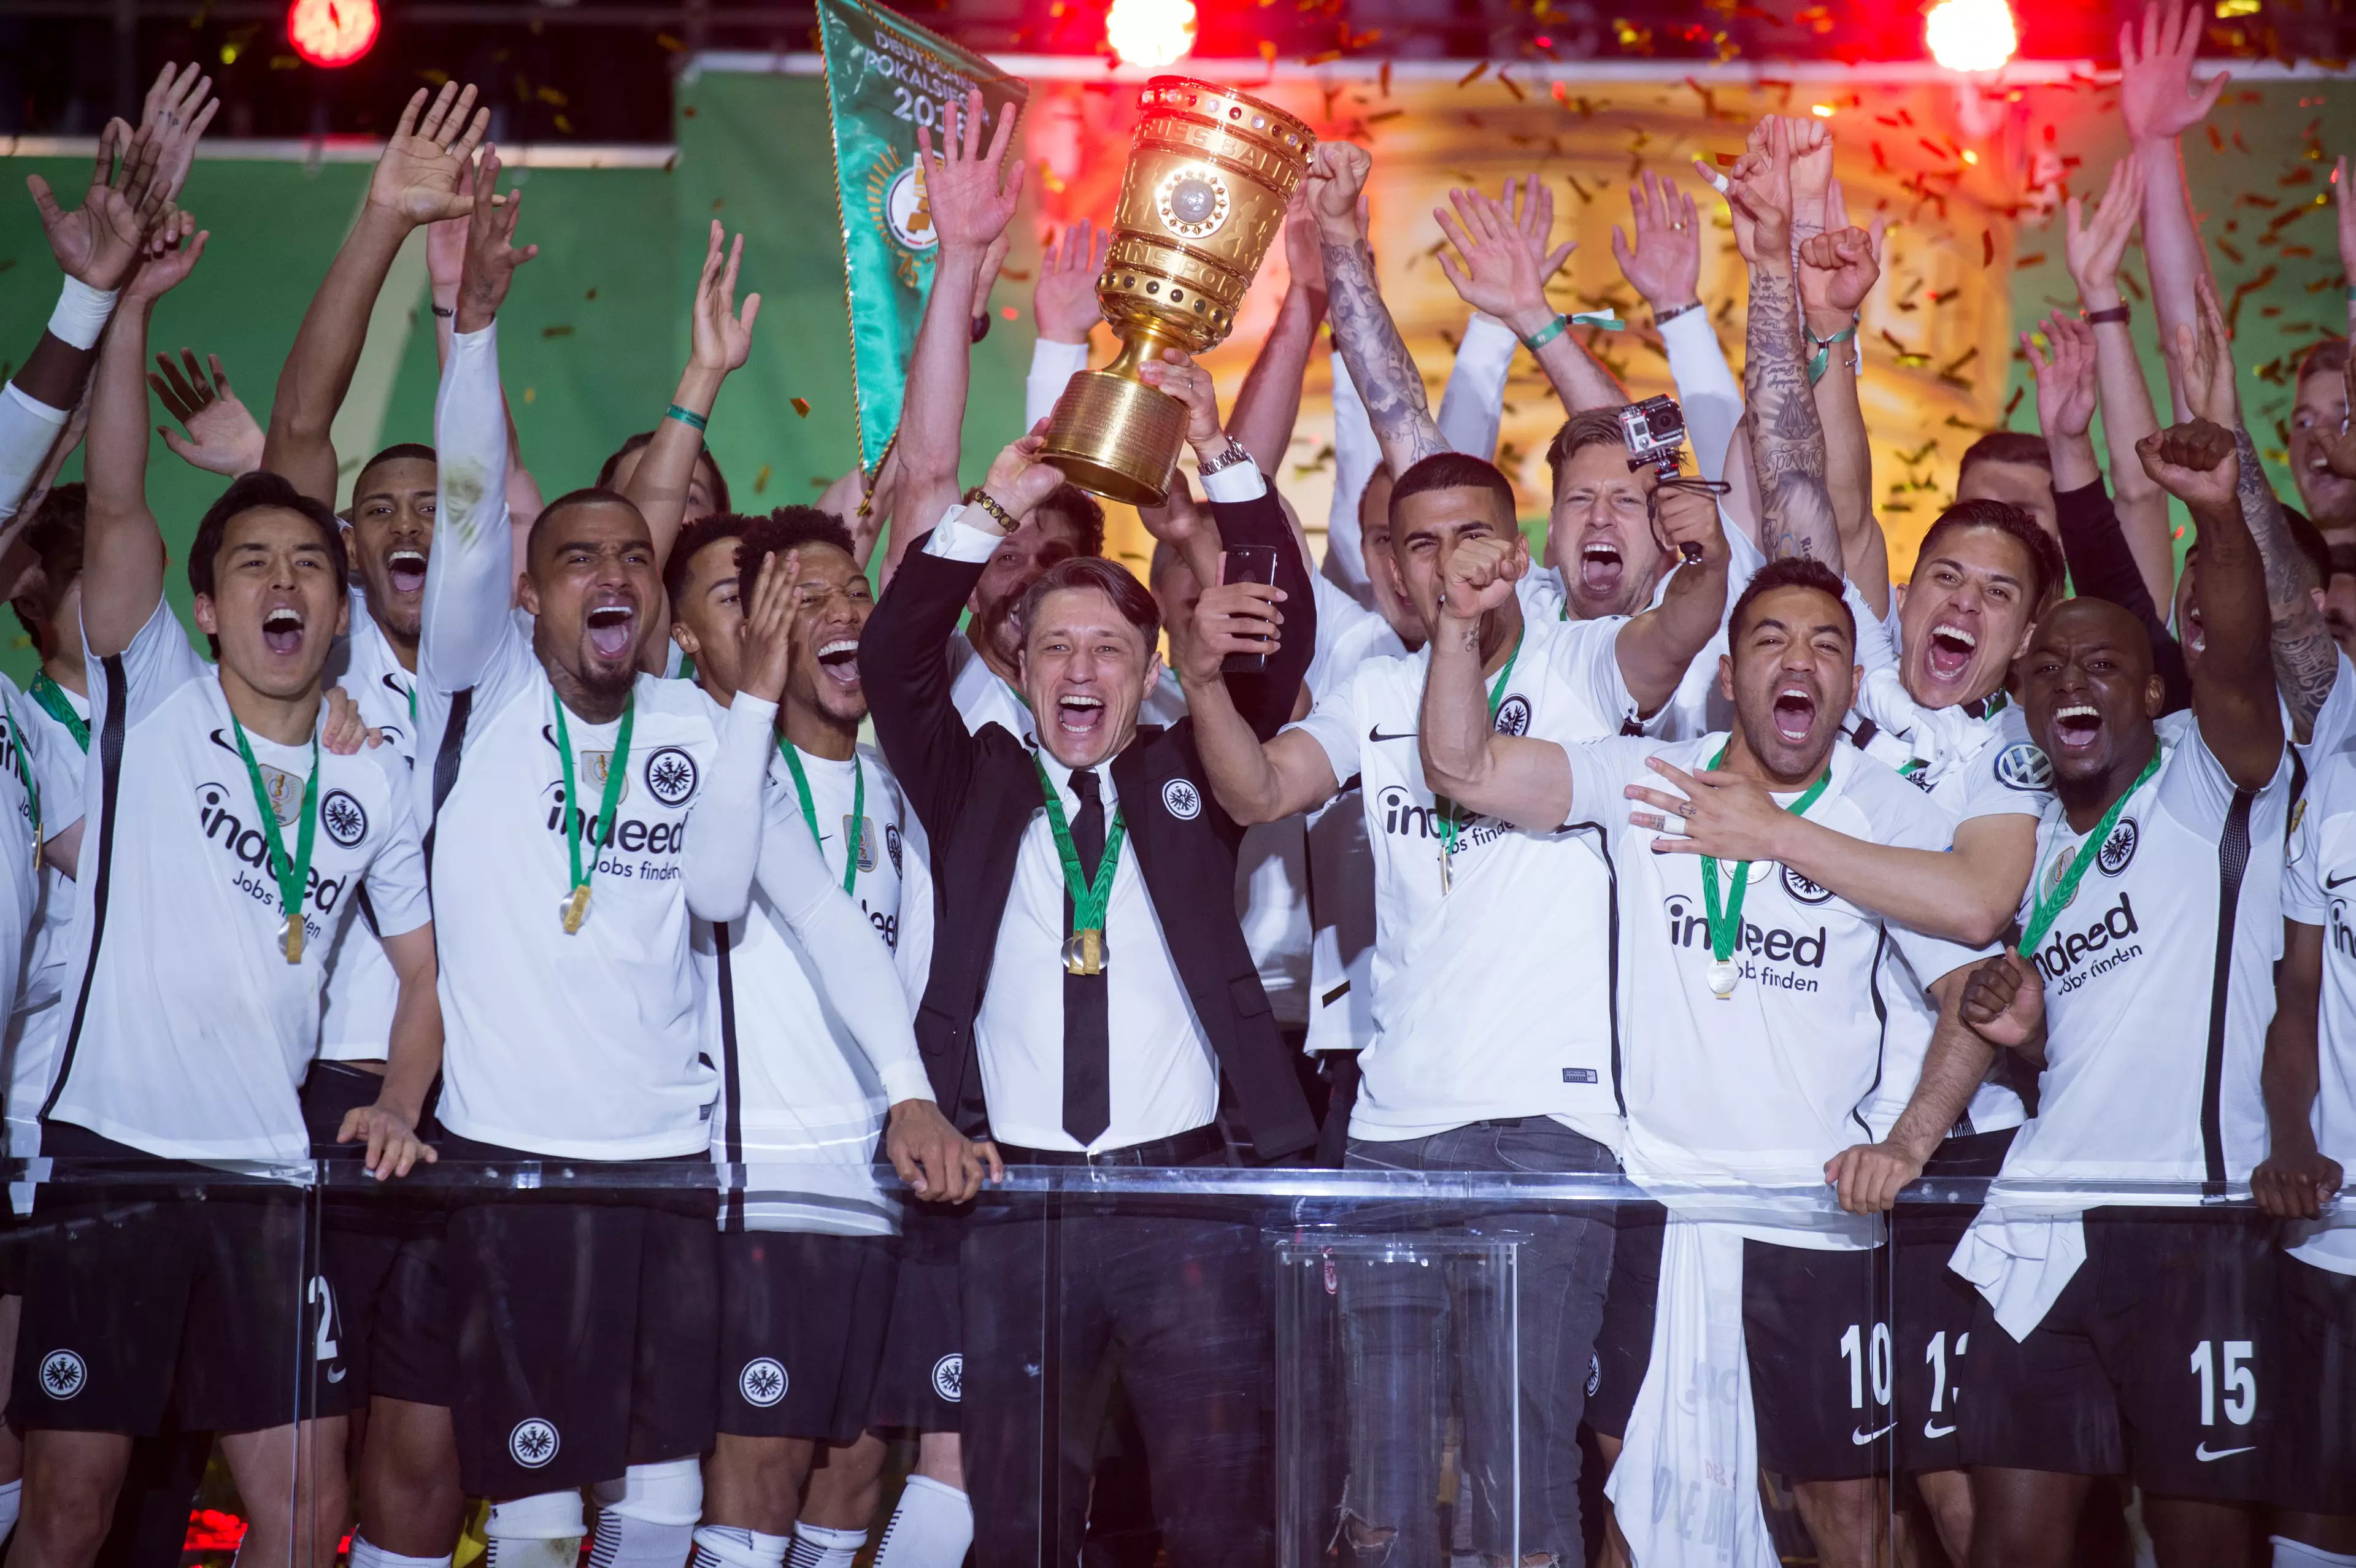 Kovac lifting the DFB-Pokal in 2018 after beating Bayern Munich 3-1. (Image